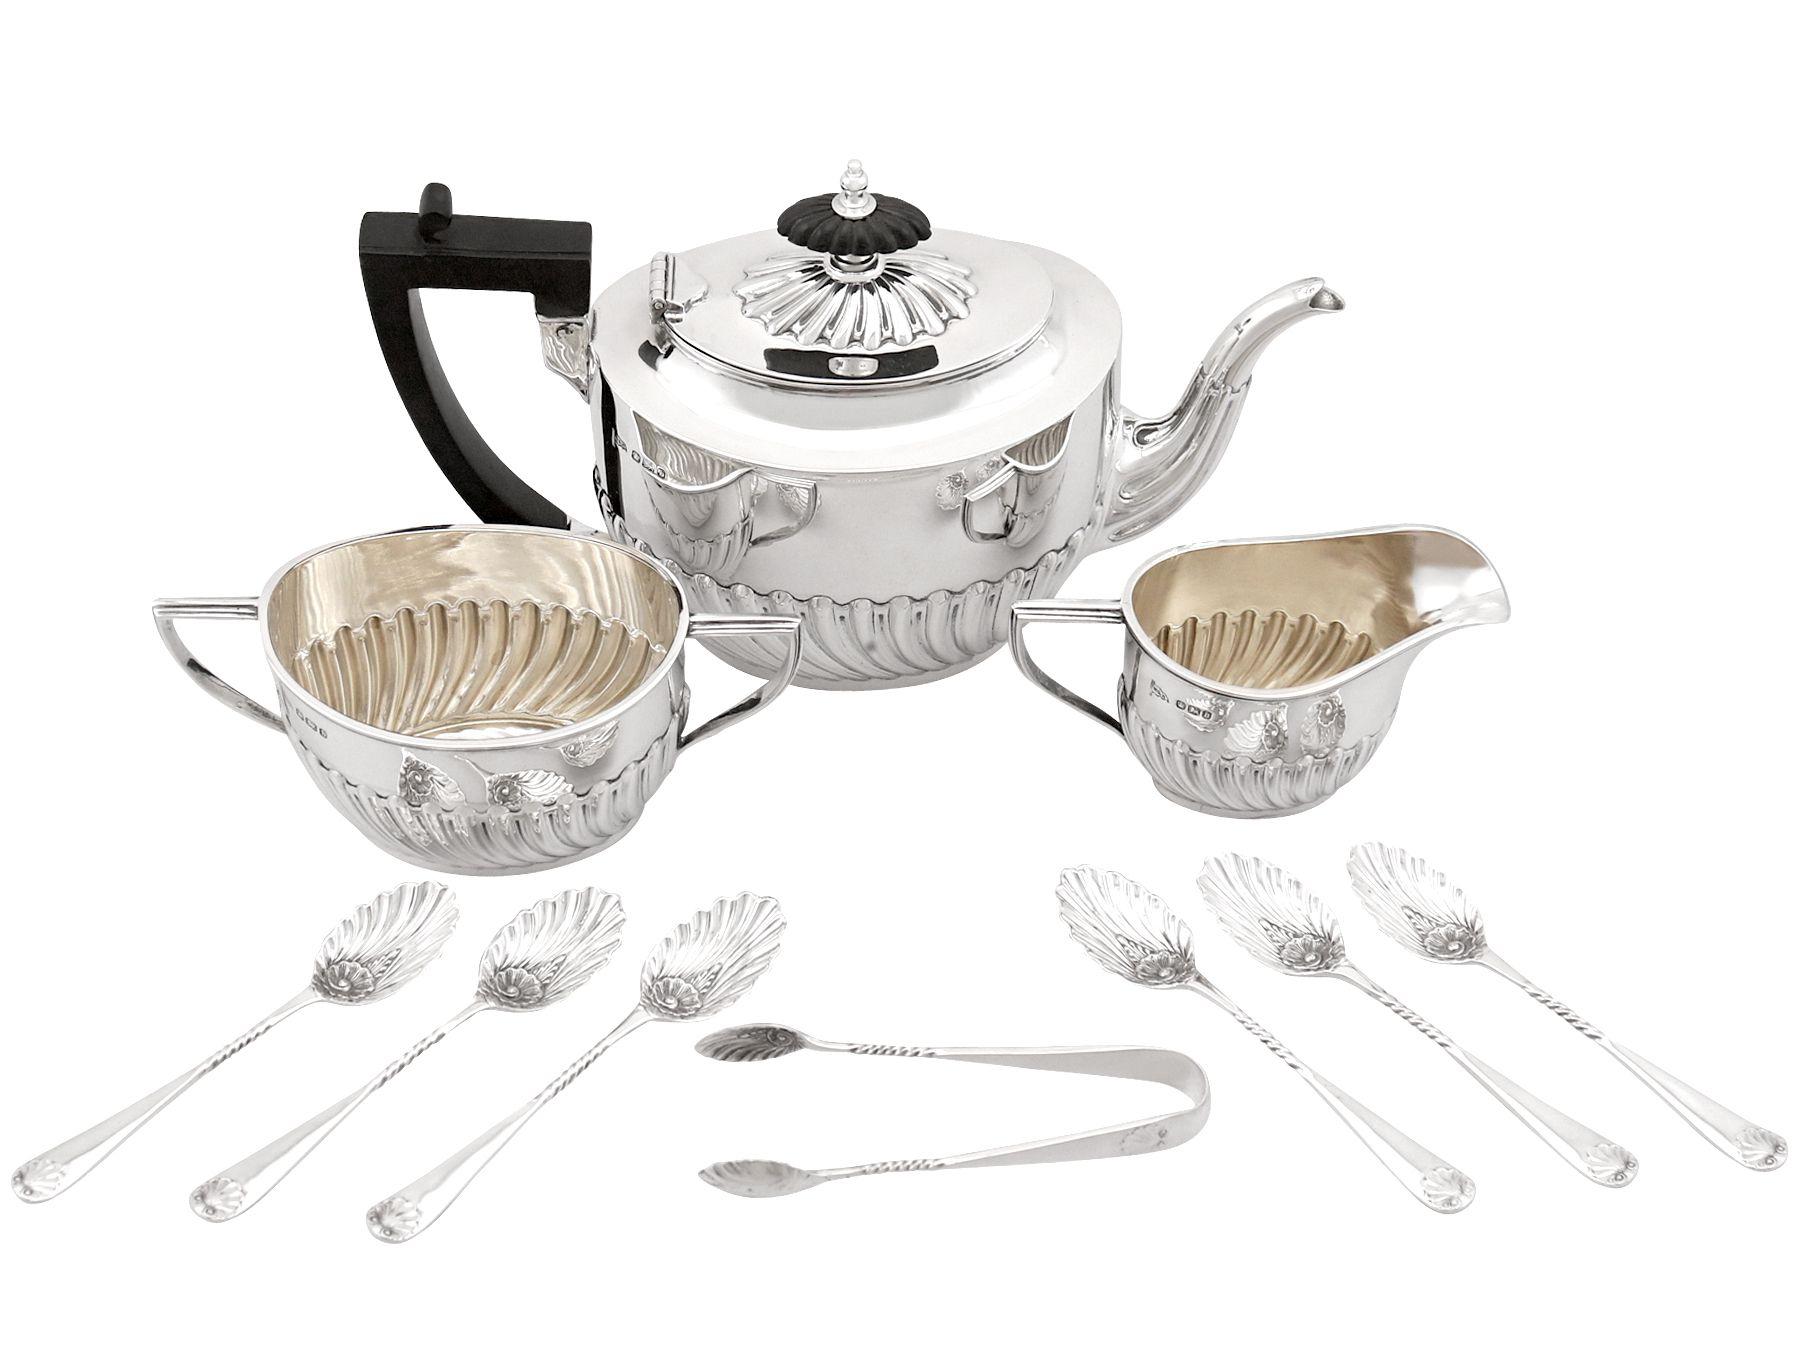 A fine and impressive antique Victorian English sterling silver three piece tea service/set - boxed; part of our silver teaware collection

This impressive antique Victorian English sterling silver three piece sterling silver tea service consists of